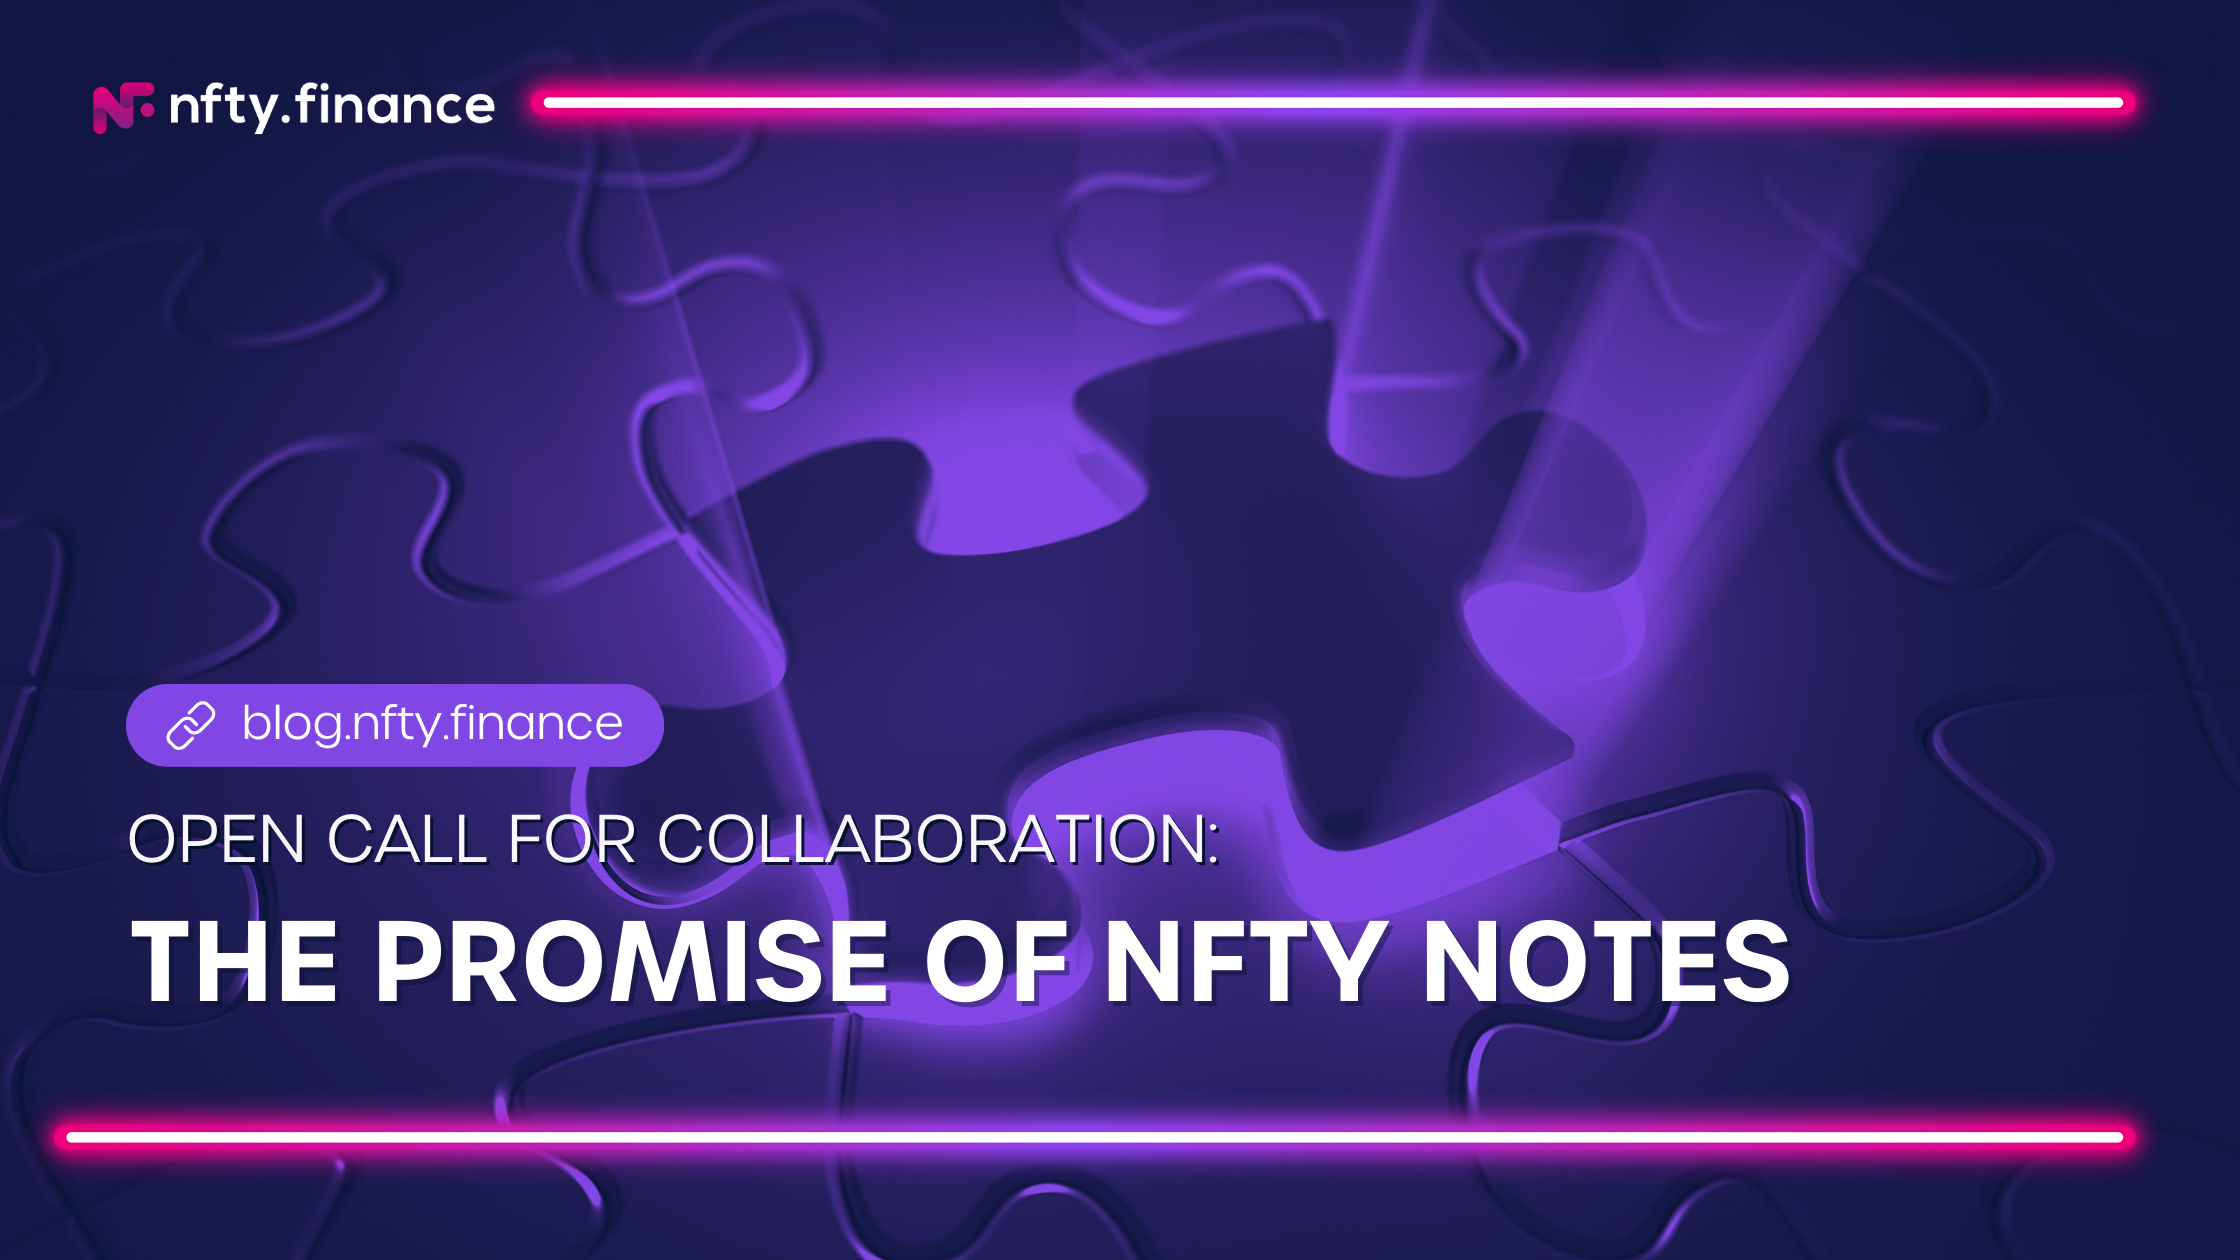 Open Call for Collaboration: NFTY Finance MainNet and the Promise of NFTY Notes